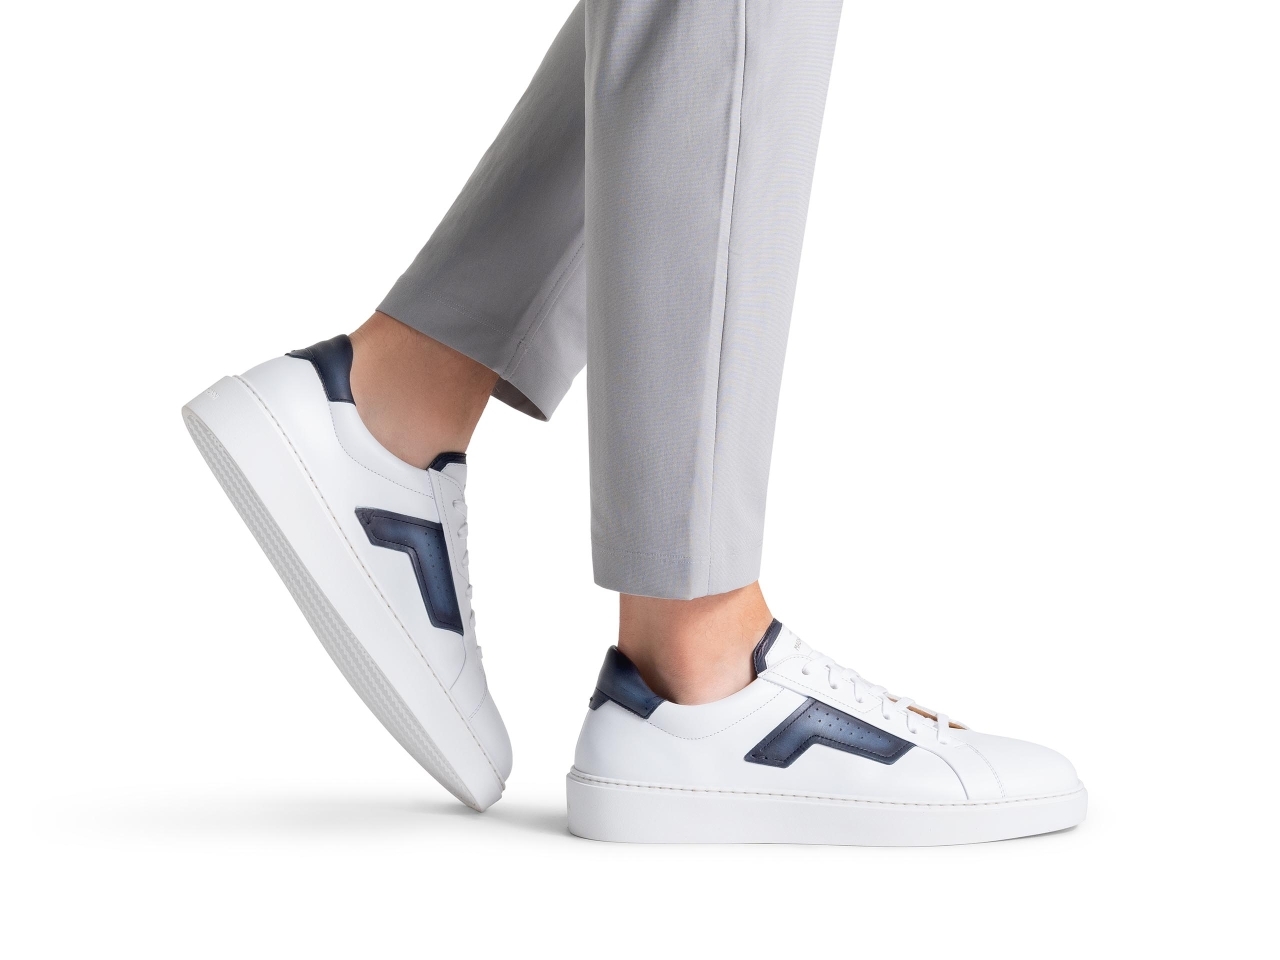 The Phoenix White / Navy pairs well with light grey pants